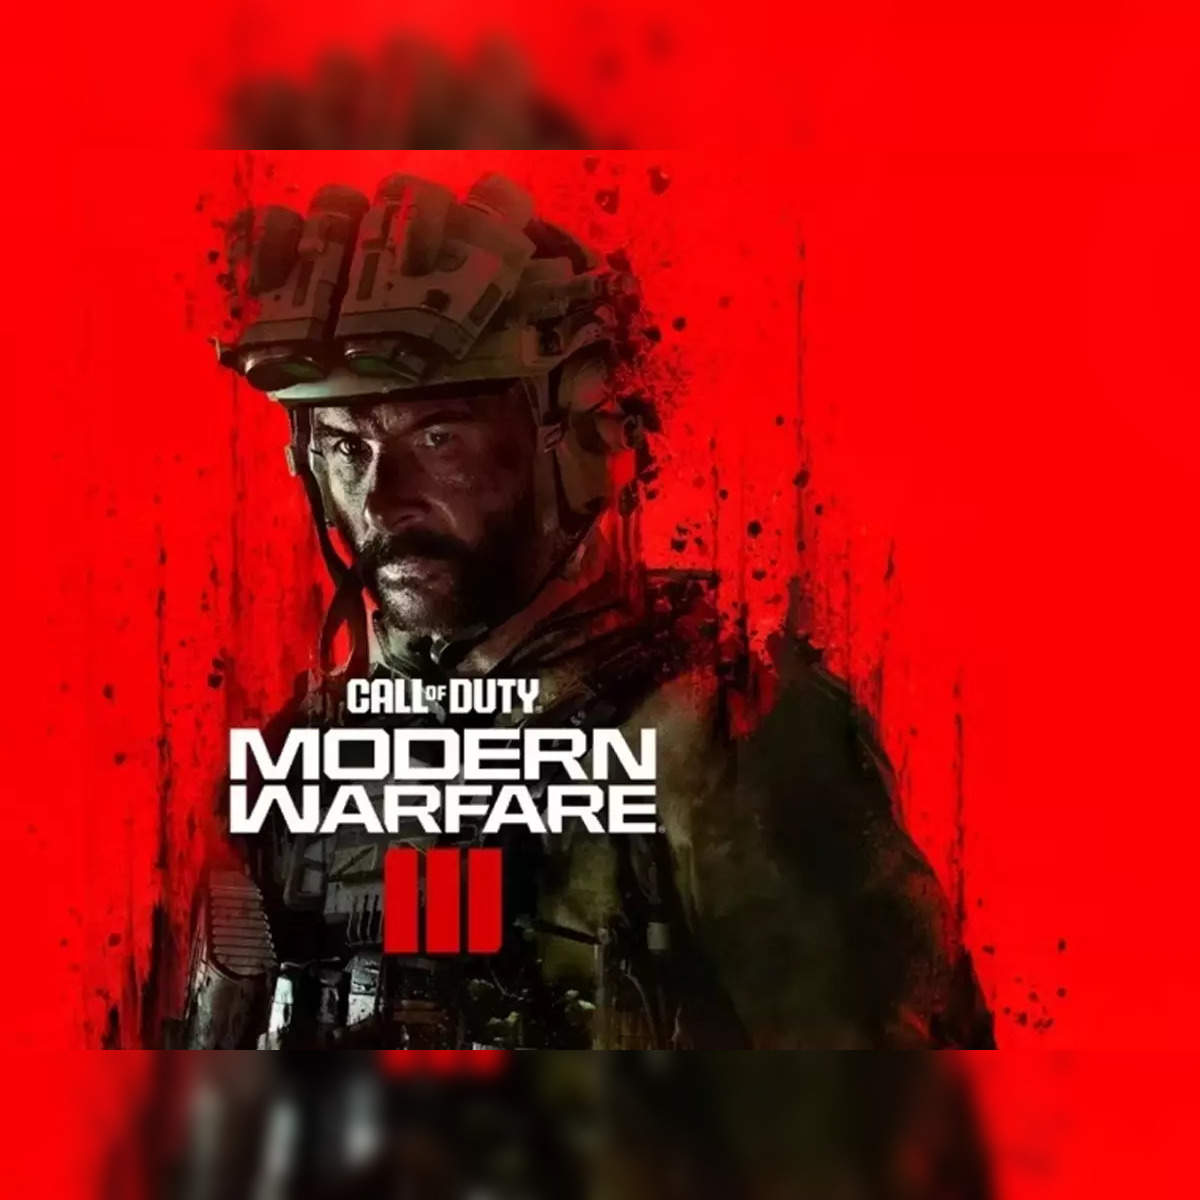 Announcement: Call of Duty: Modern Warfare III and Call of Duty